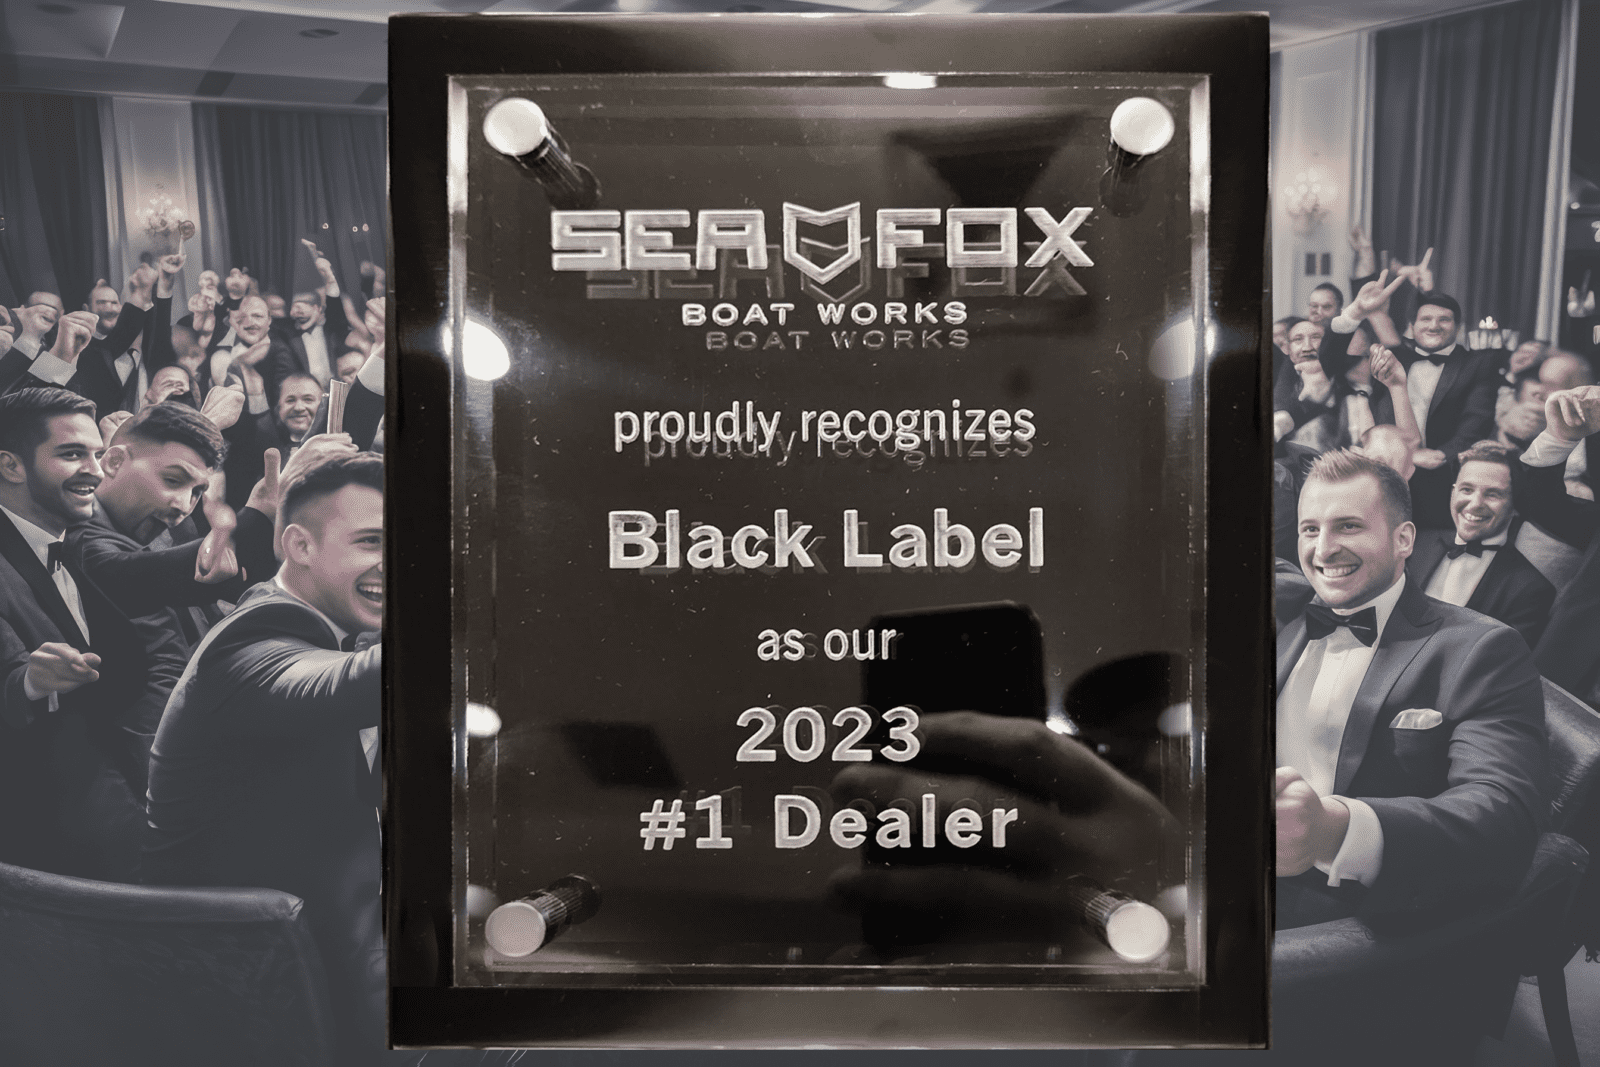 sea-fox-boat-works-proudly-recognizes-black-label-as-number-one-dealership